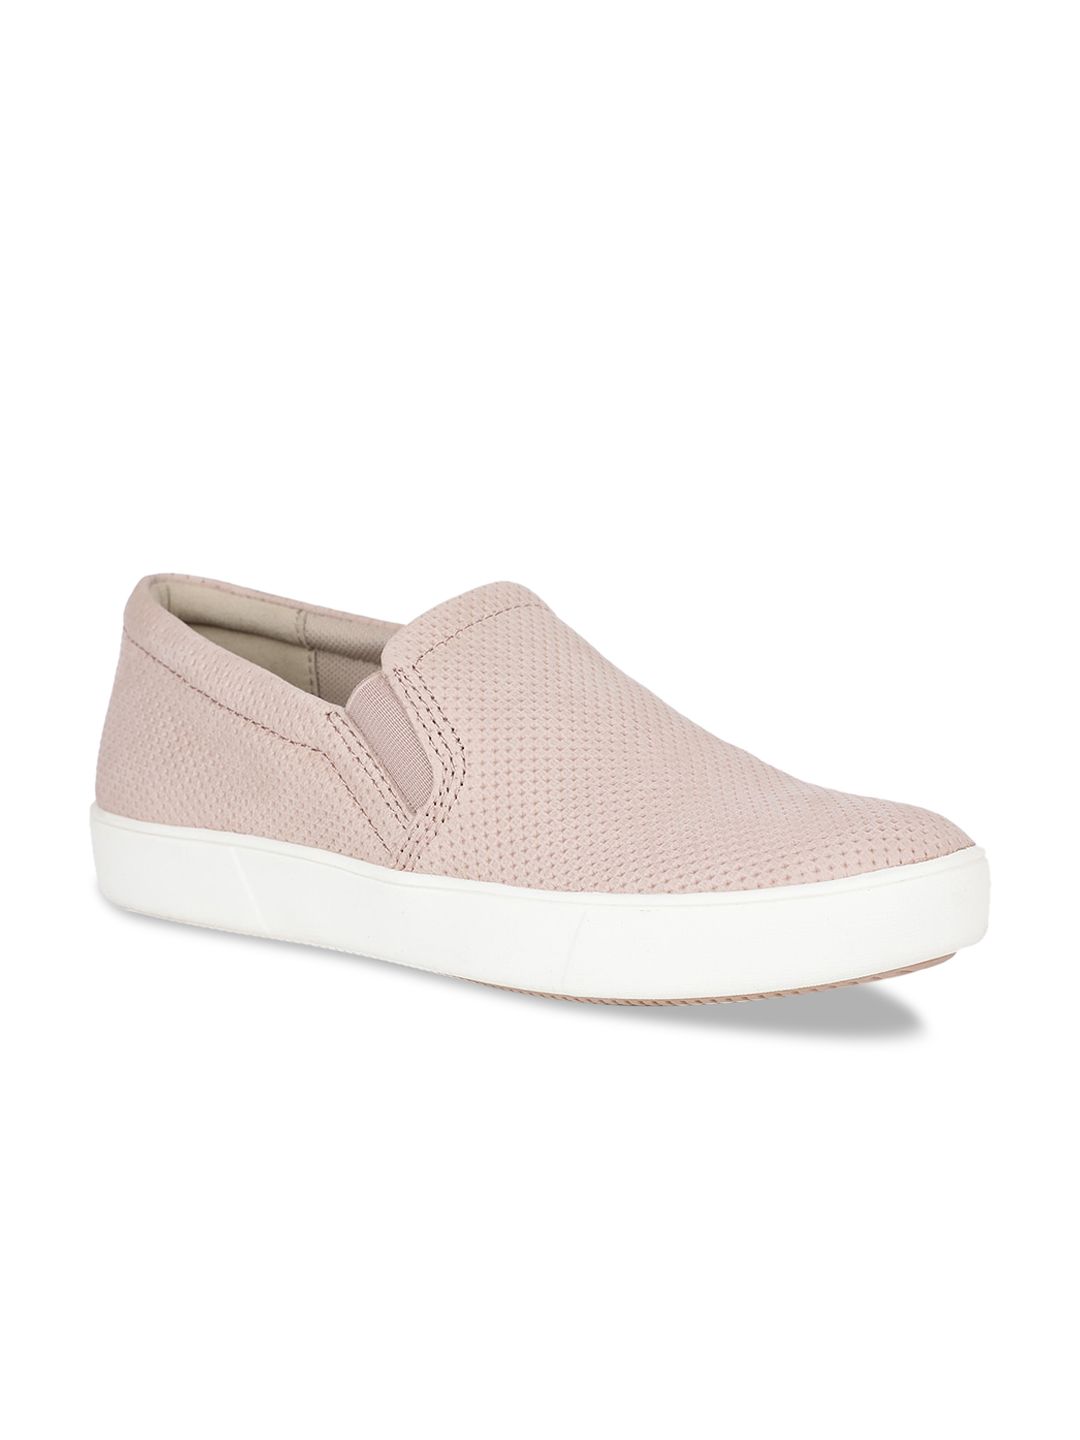 Naturalizer Women PinkPerforated Leather Slip-On Sneakers Price in India